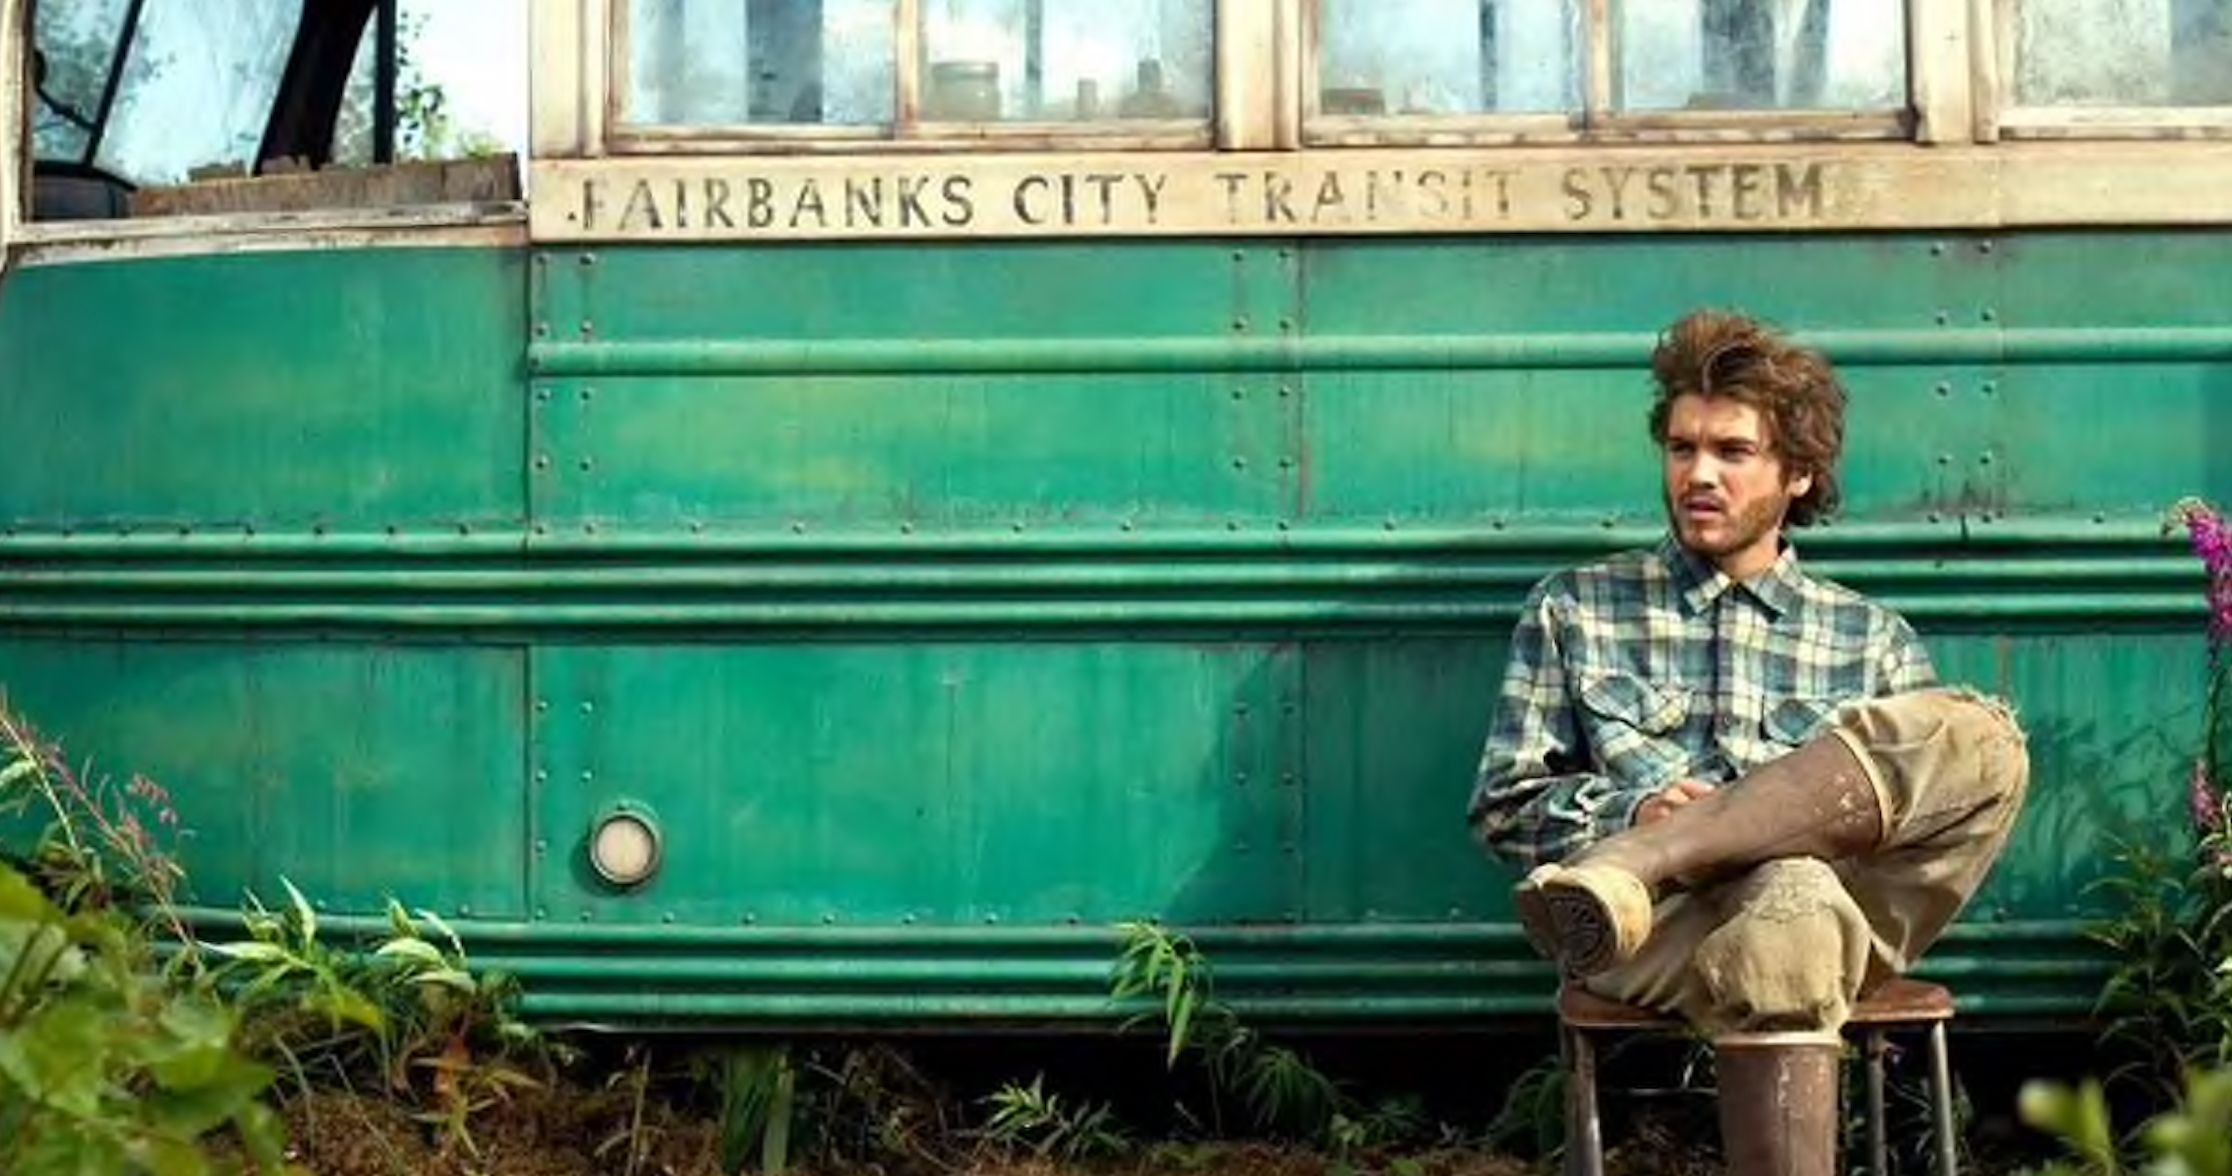 Into the Wild Bus Gets Airlifted Out of Alaska Back Country